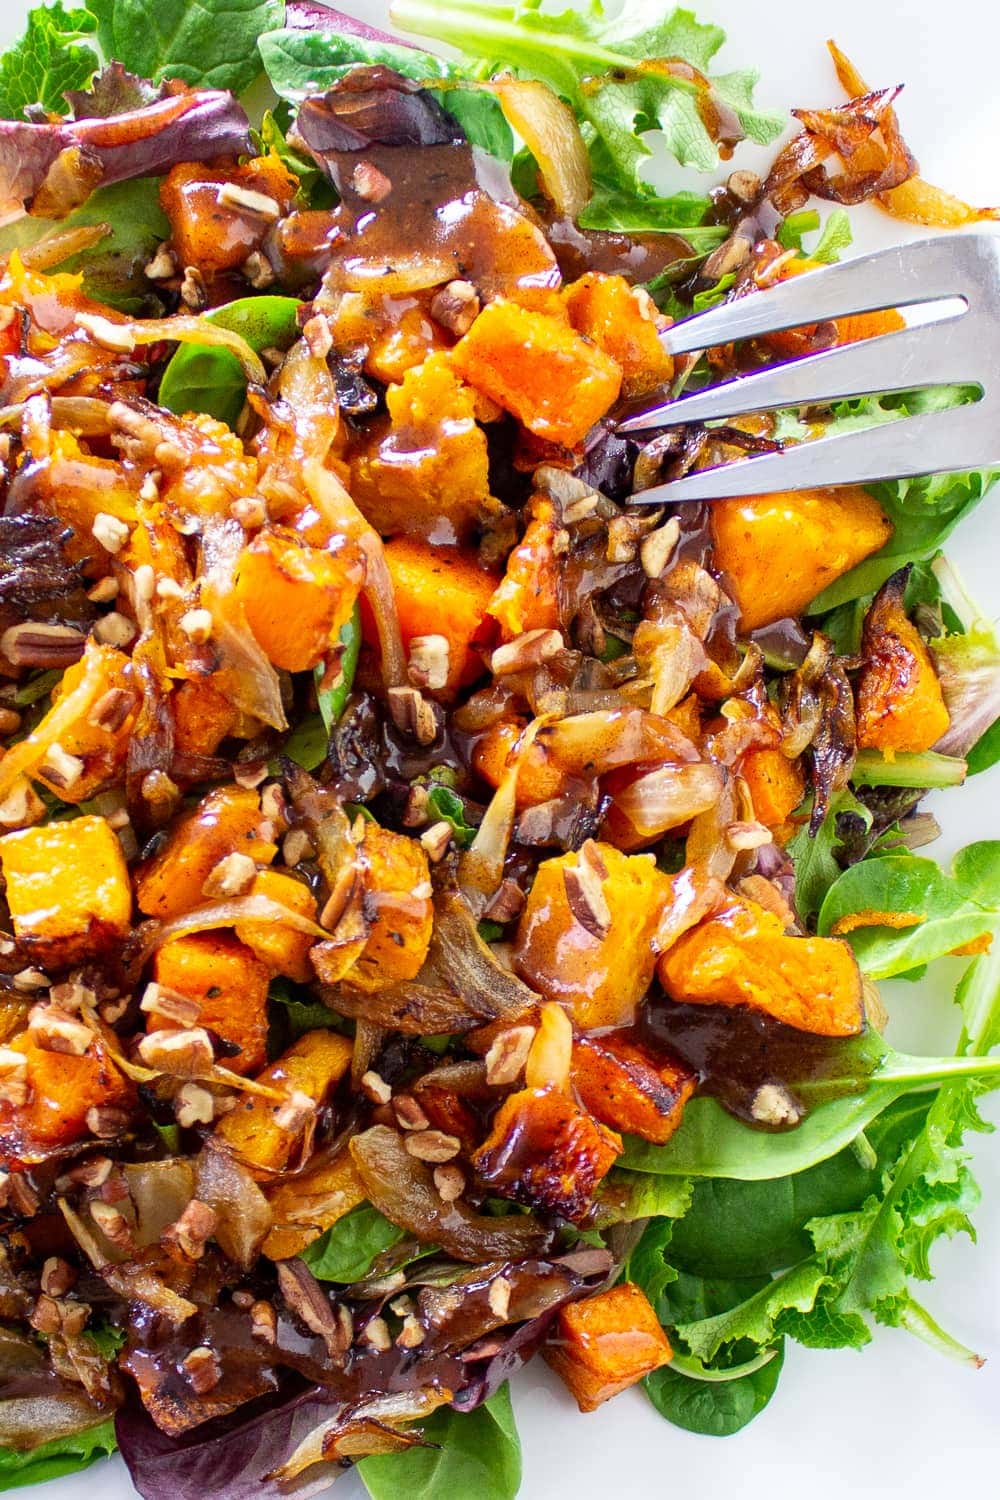 butternut squash salad with cinnamon dressing on plate p